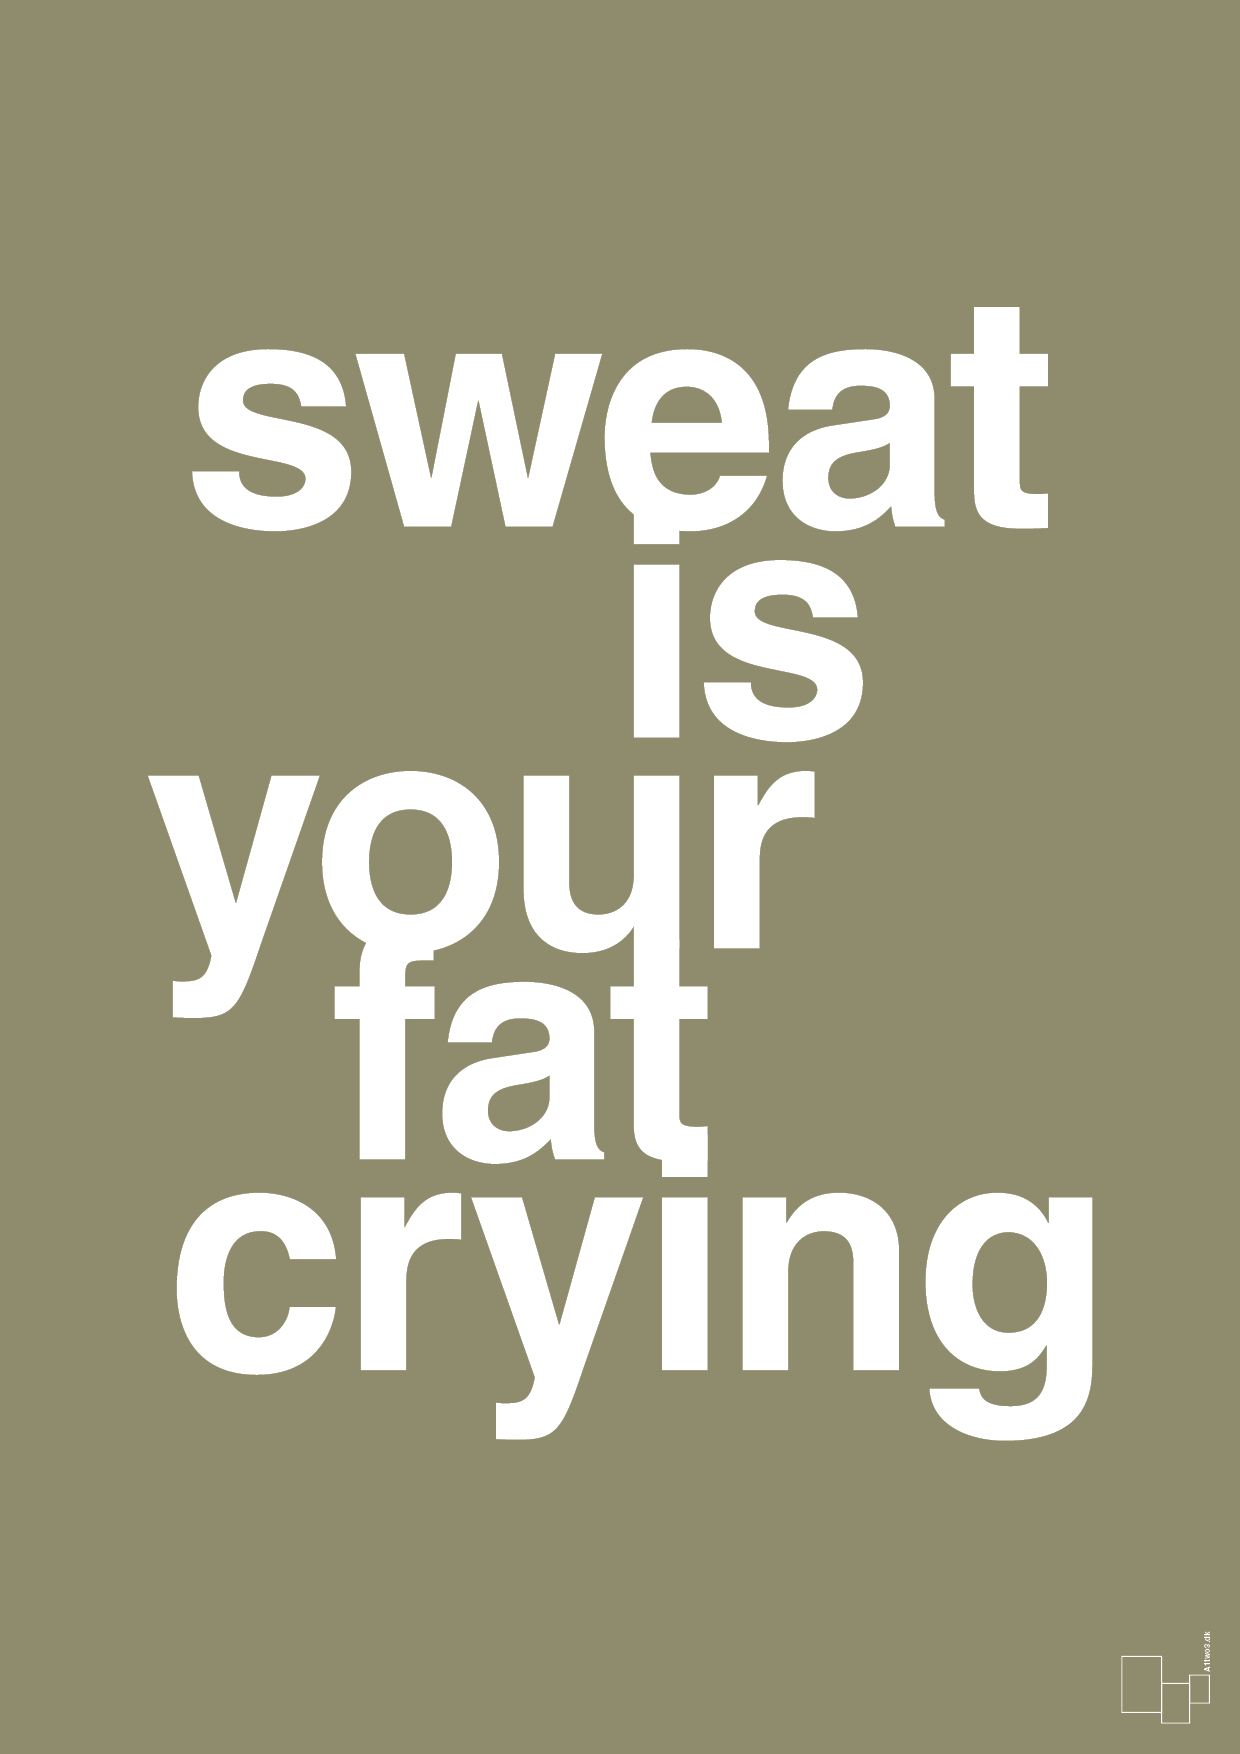 sweat is your fat crying - Plakat med Sport & Fritid i Misty Forrest